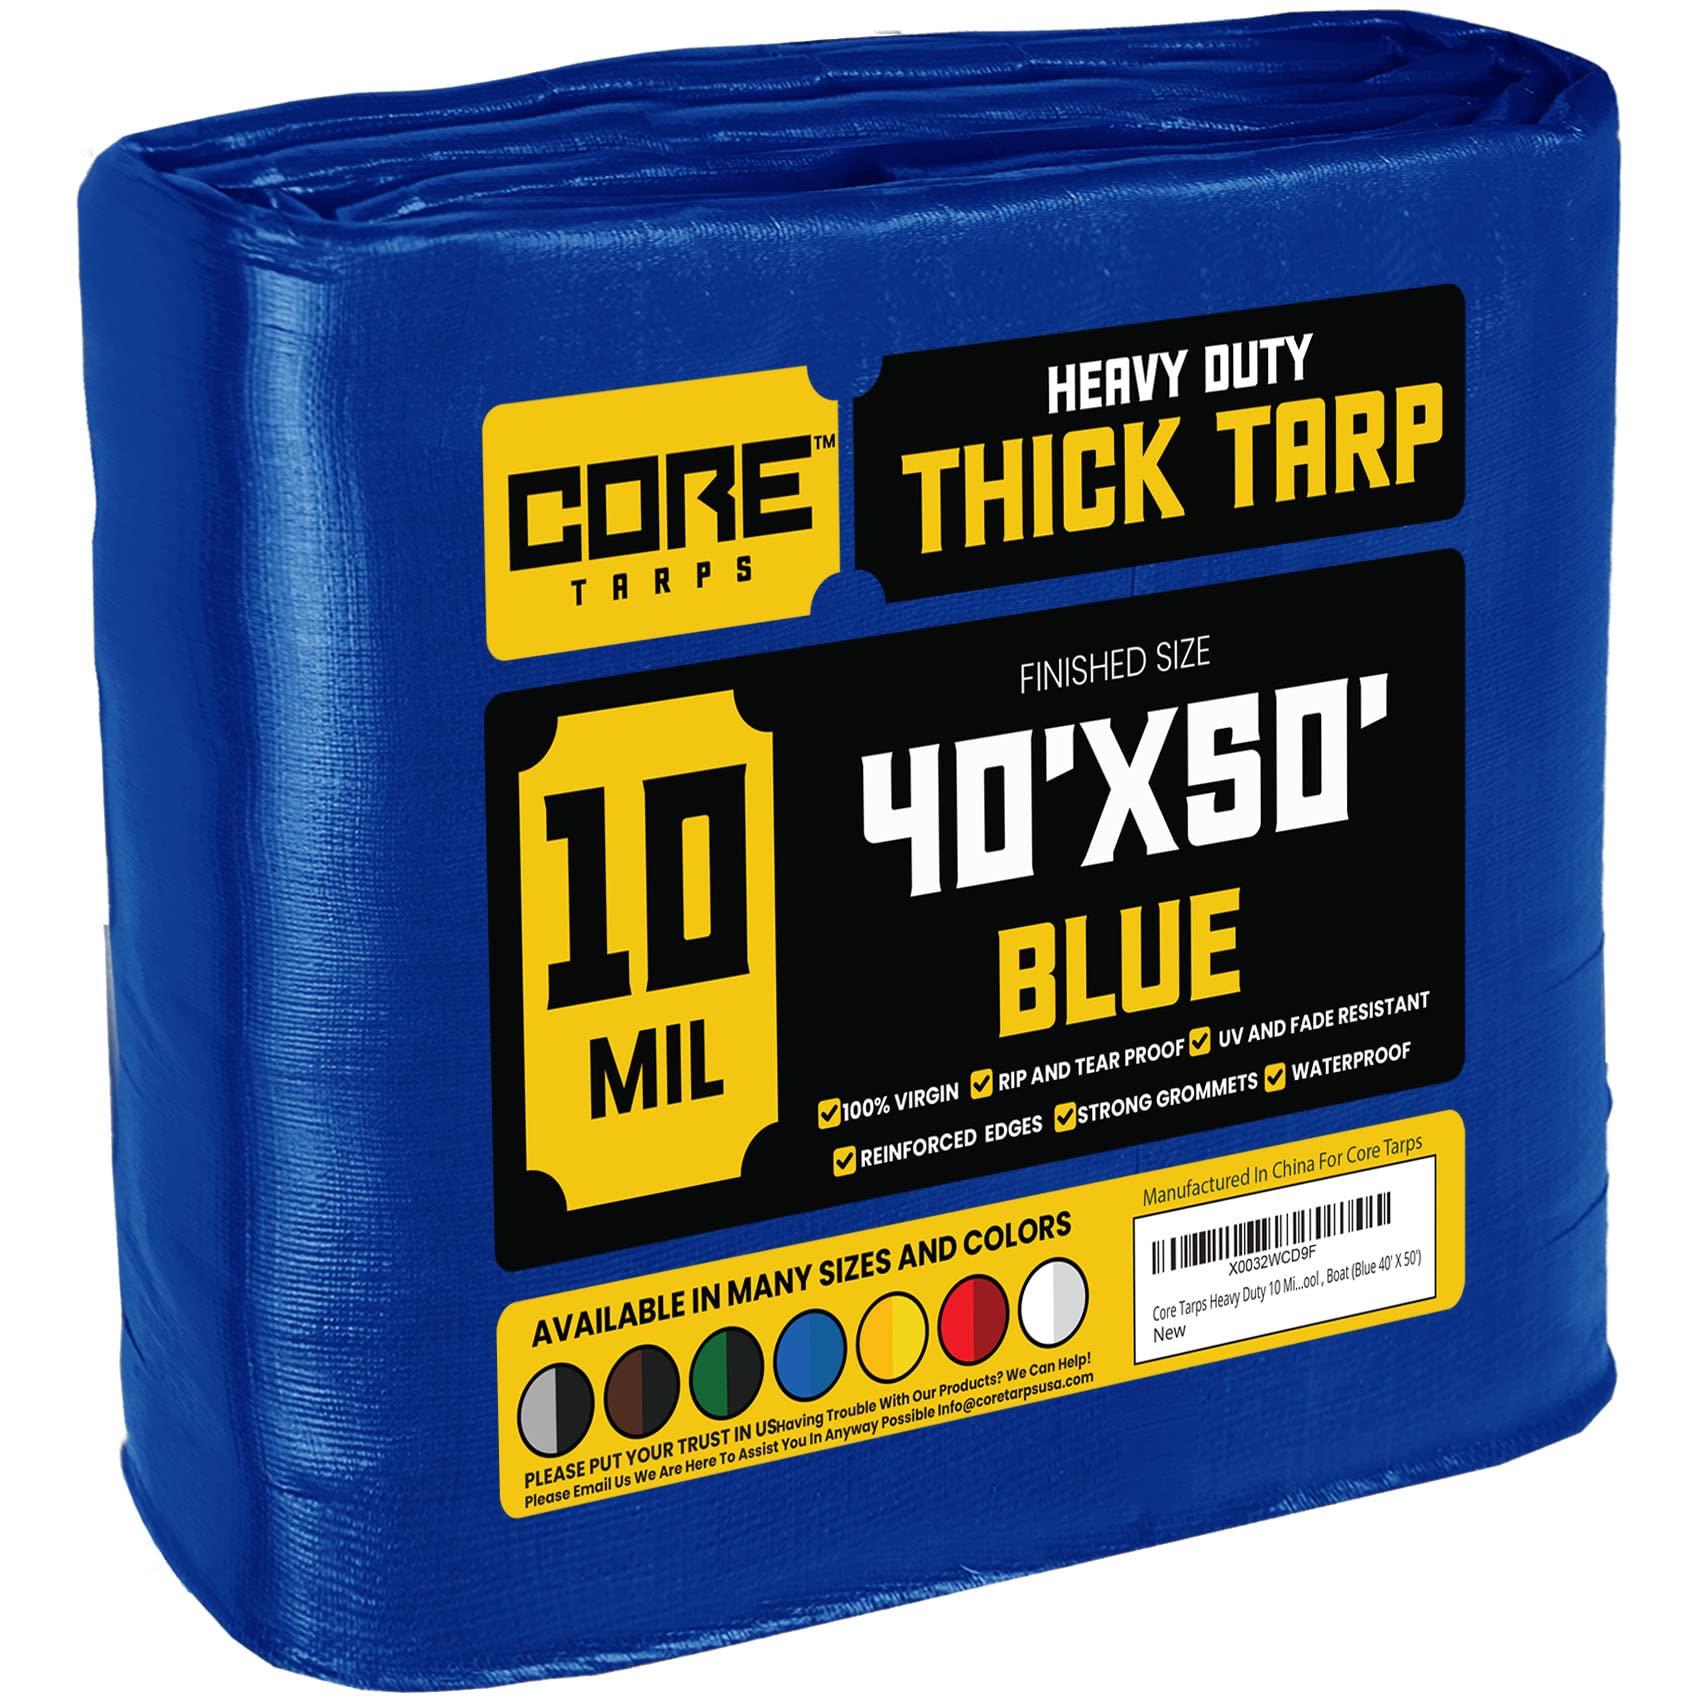 core Tarps Heavy Duty 10 Mil Tarp cover, Waterproof, UV Resistant, Rip and Tear Proof, Poly Tarpaulin with Reinforced Edges for 